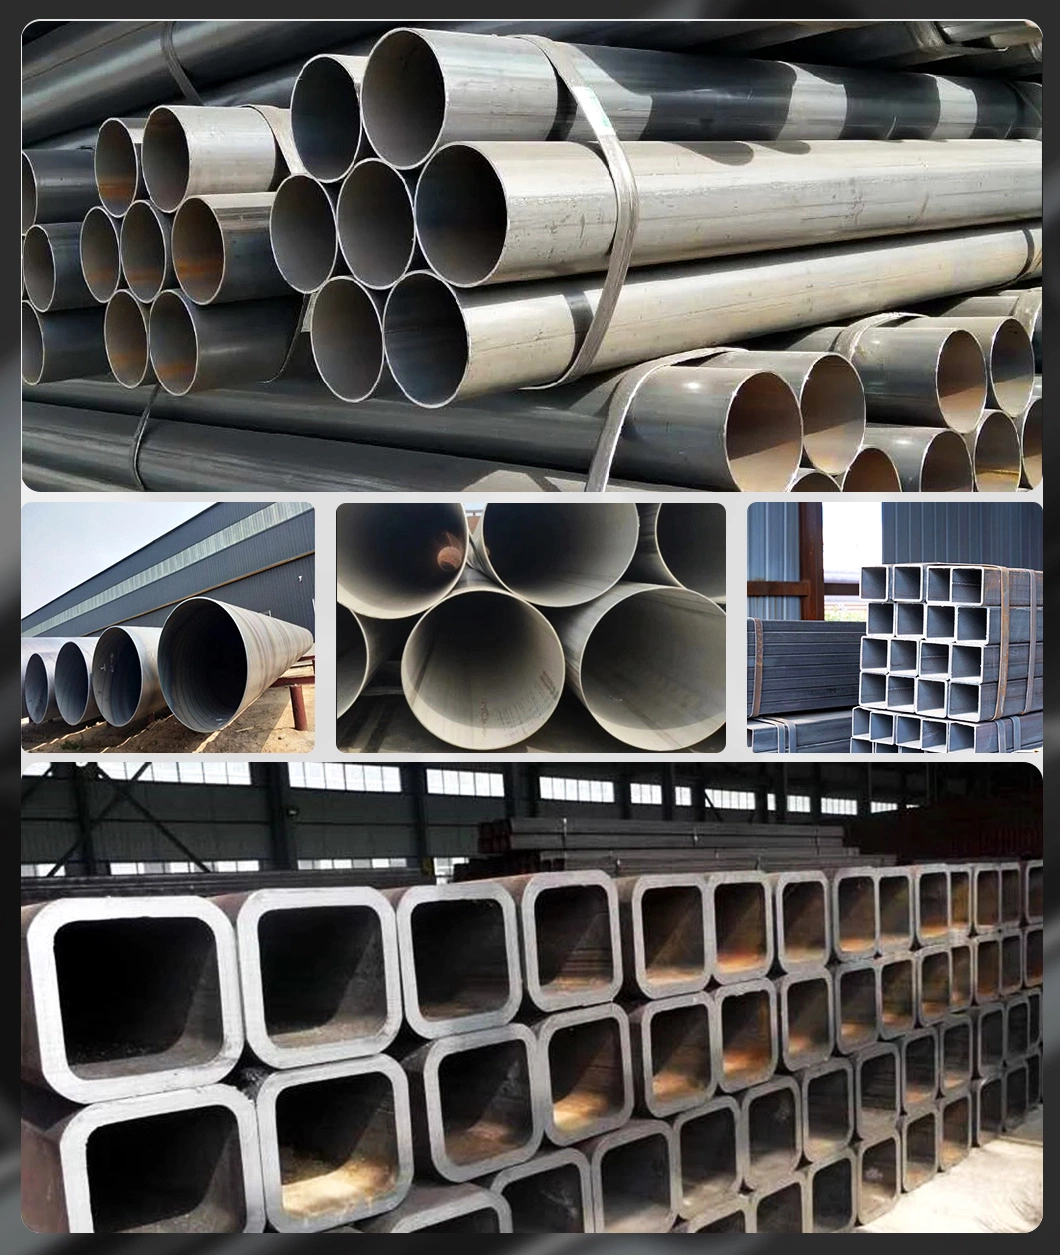 China Factory API 5L X-65 Q235B Q345b Q420c Q460c Ss400 Ss540 S235 S275 A36 A53 A106 A500 1000mm Large Diameter API5l SSAW LSAW ERW Spiral Seamless Tube Pipe